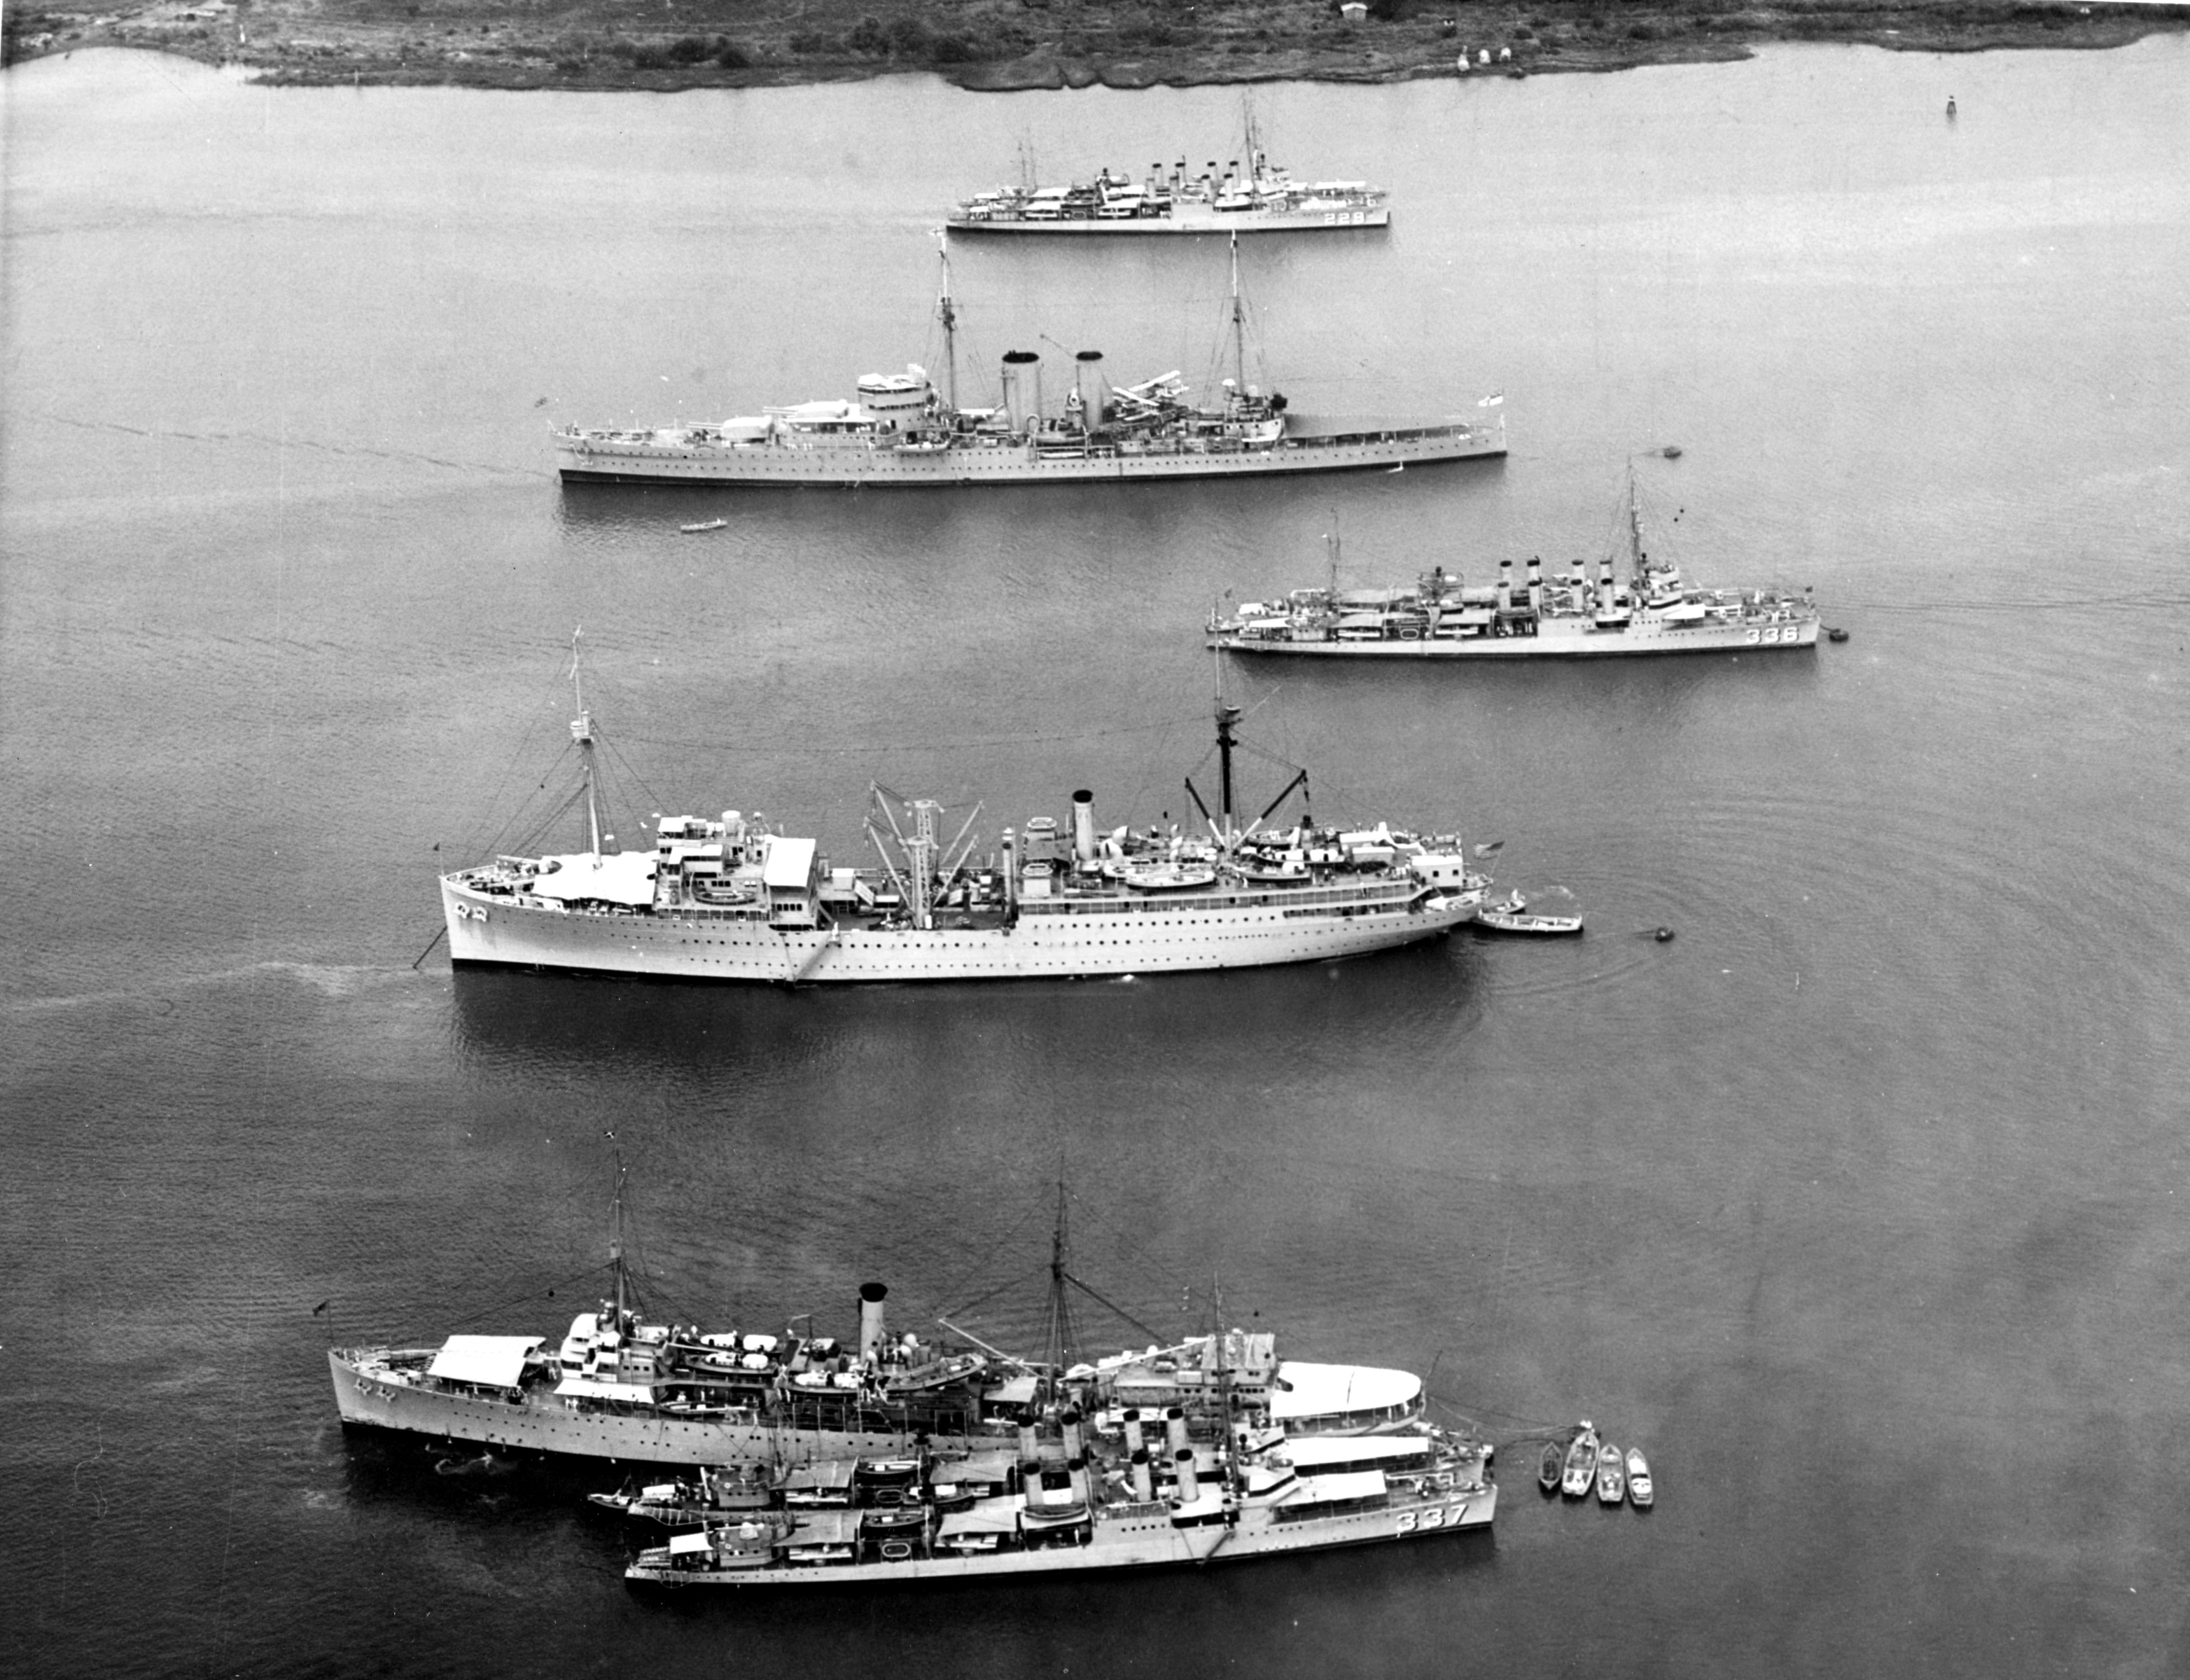 USS Melville (foreground, with USS Zane and another destroyer), USS Medusa, USS Litchfield (with another destroyer), HMS Exeter, and USS Truxtun (background, with another destroyer) in Balboa harbor, Panama Canal Zone, 24 Apr 1934